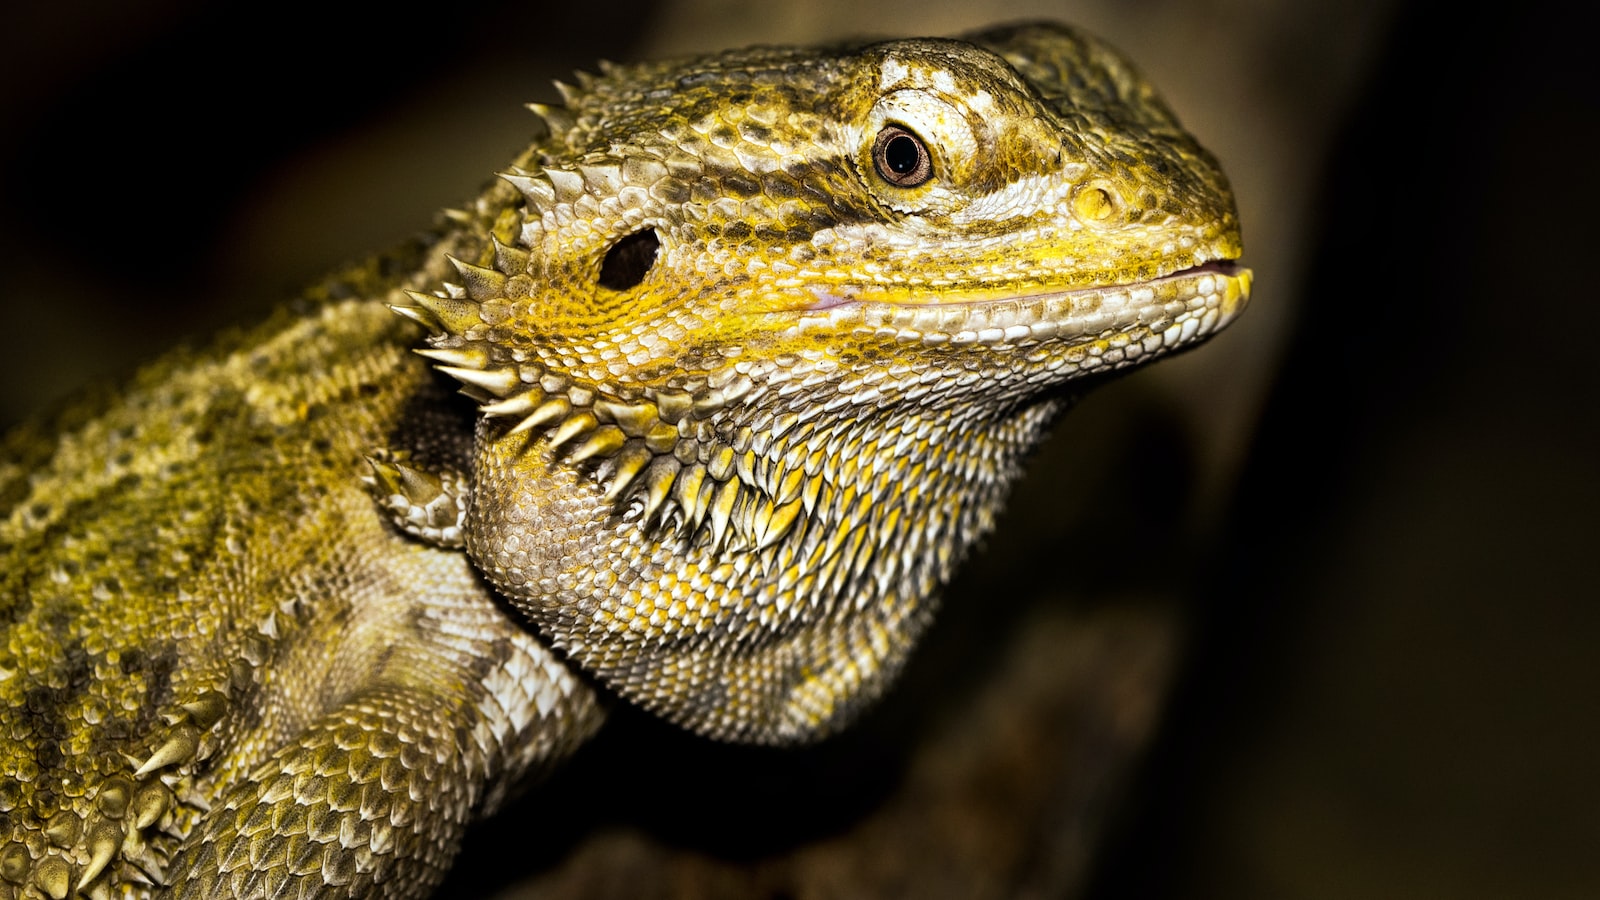 3. Choosing the Perfect Substrate and Lighting for Your Bearded Dragon's Habitat